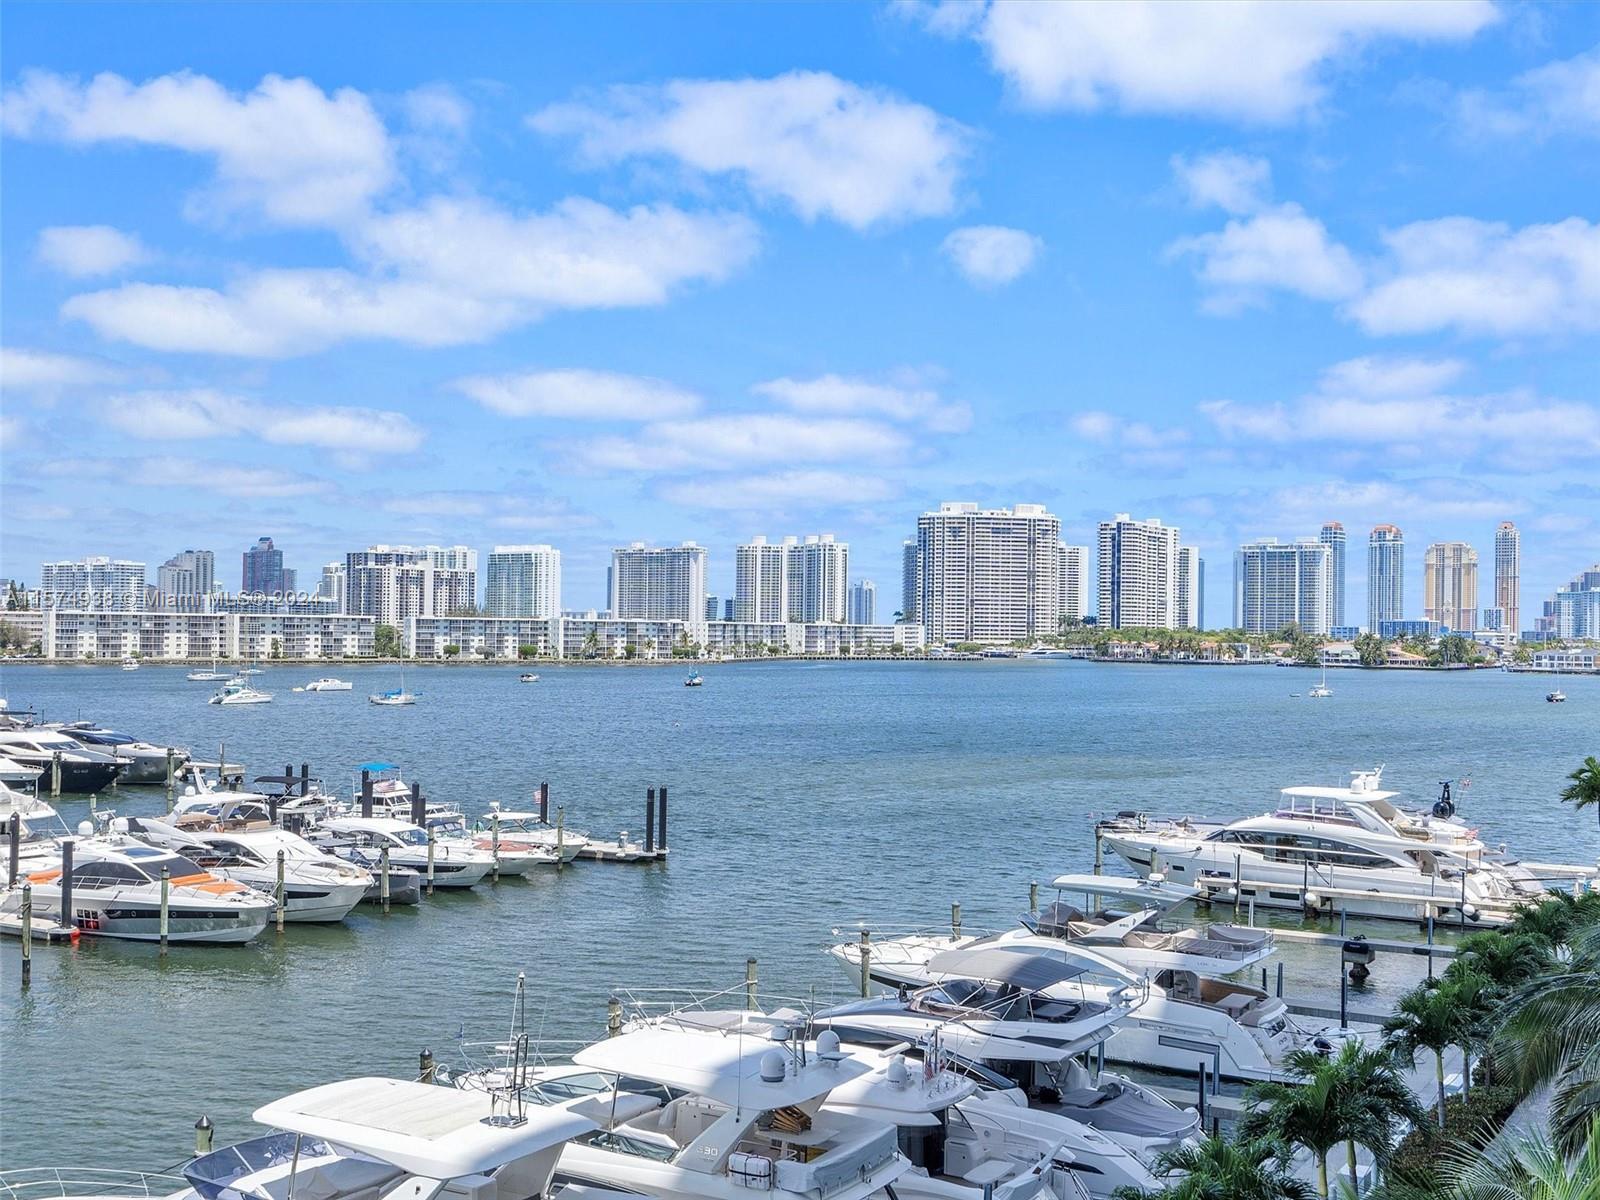 Stunning 2 bedroom plus Den, 2.5 baths, views marina and intracoastal. Includes 1 parking assigned p